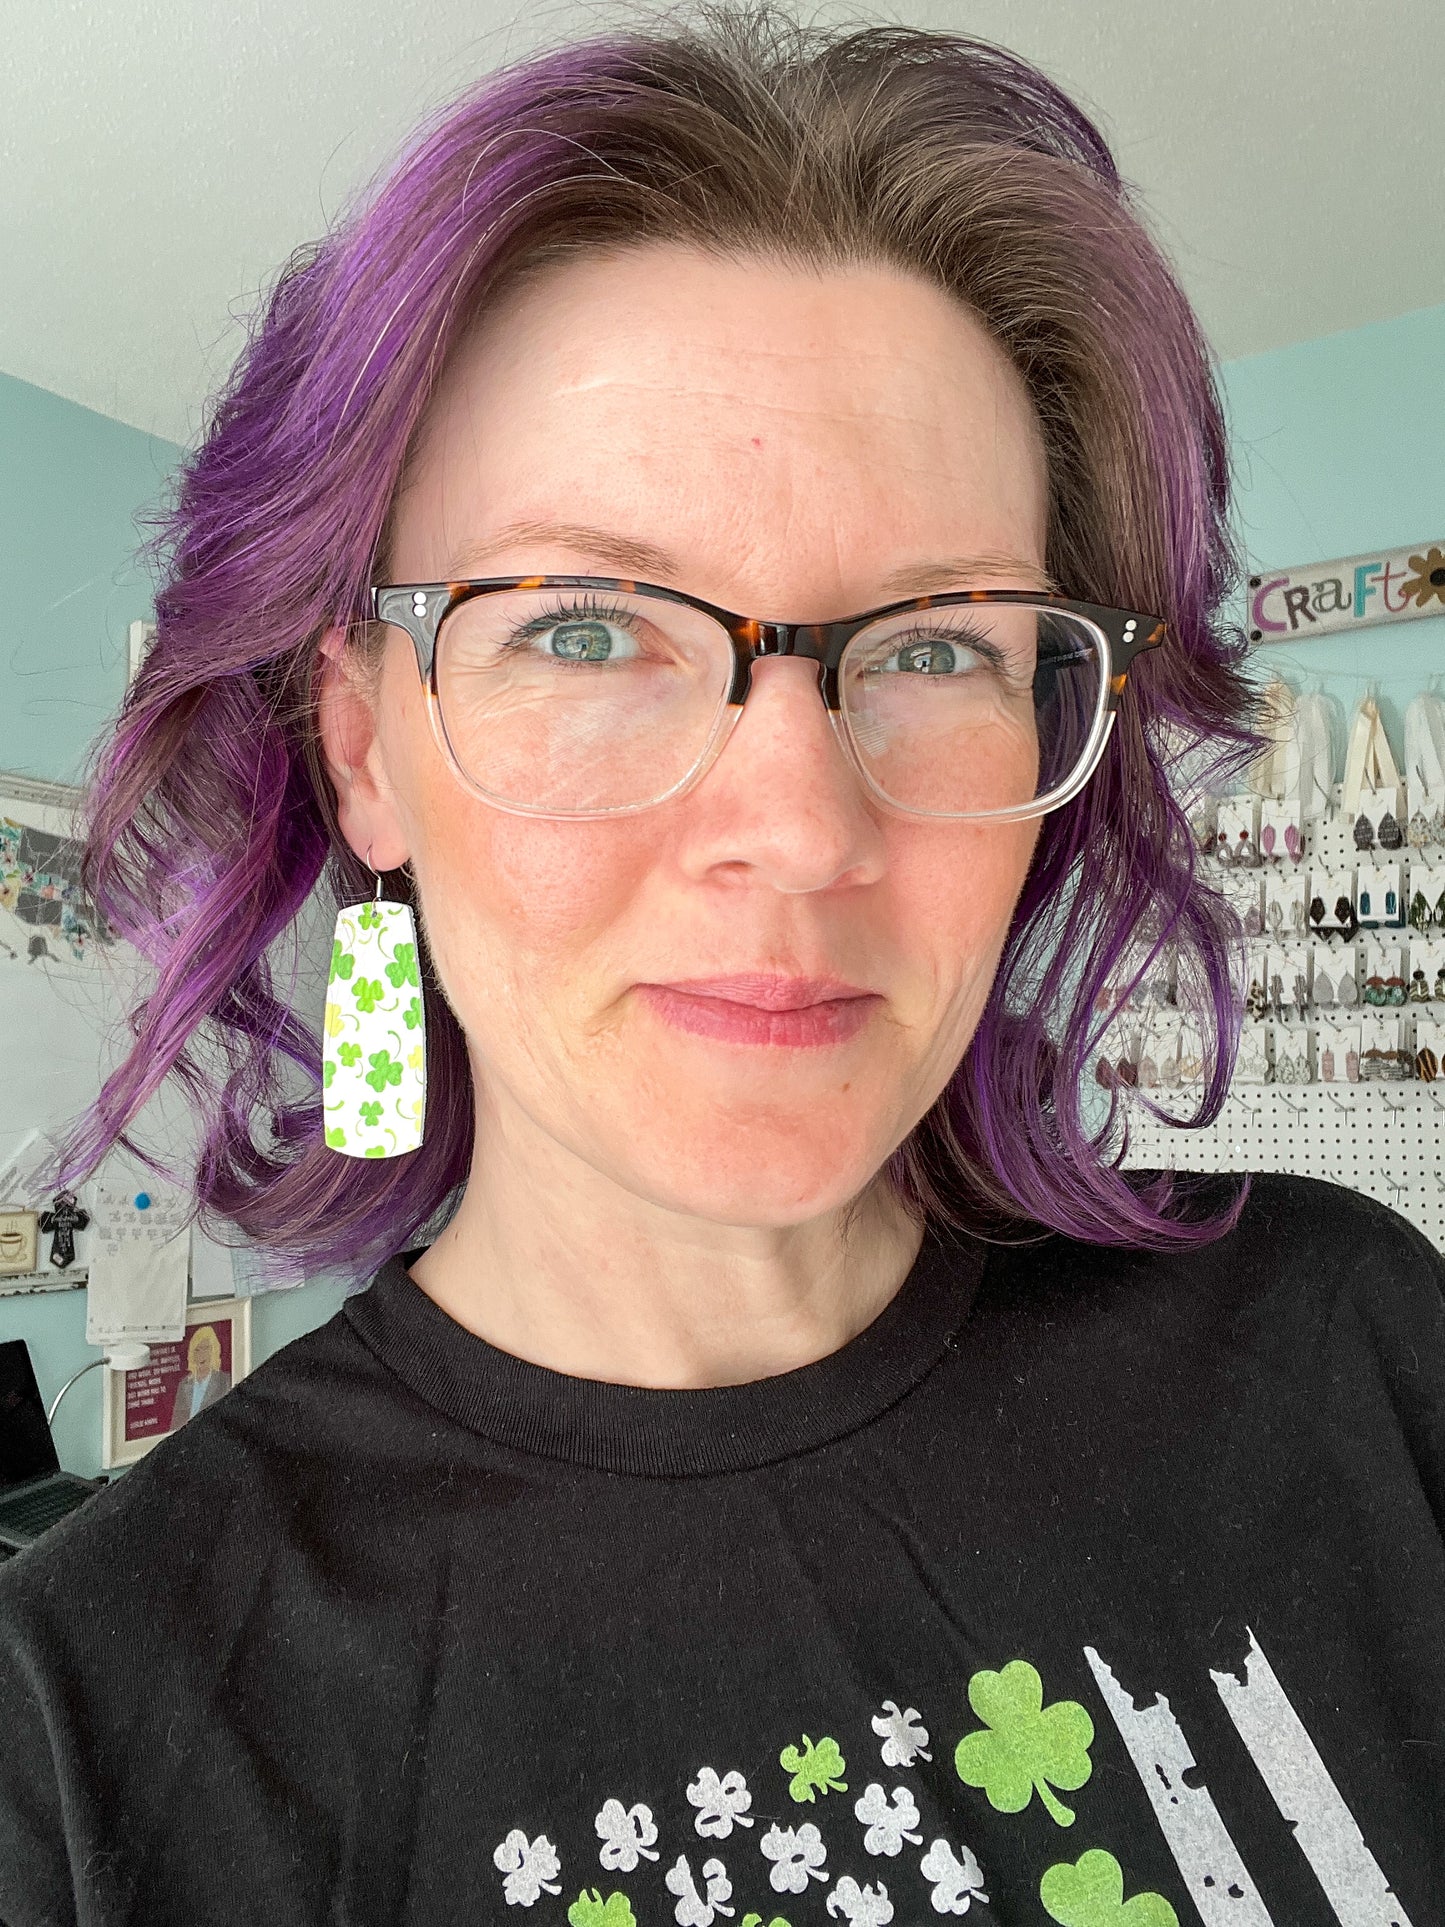 St. Patty's Day Clover Leather Earrings: Choose From 2 Styles - LAST CHANCE